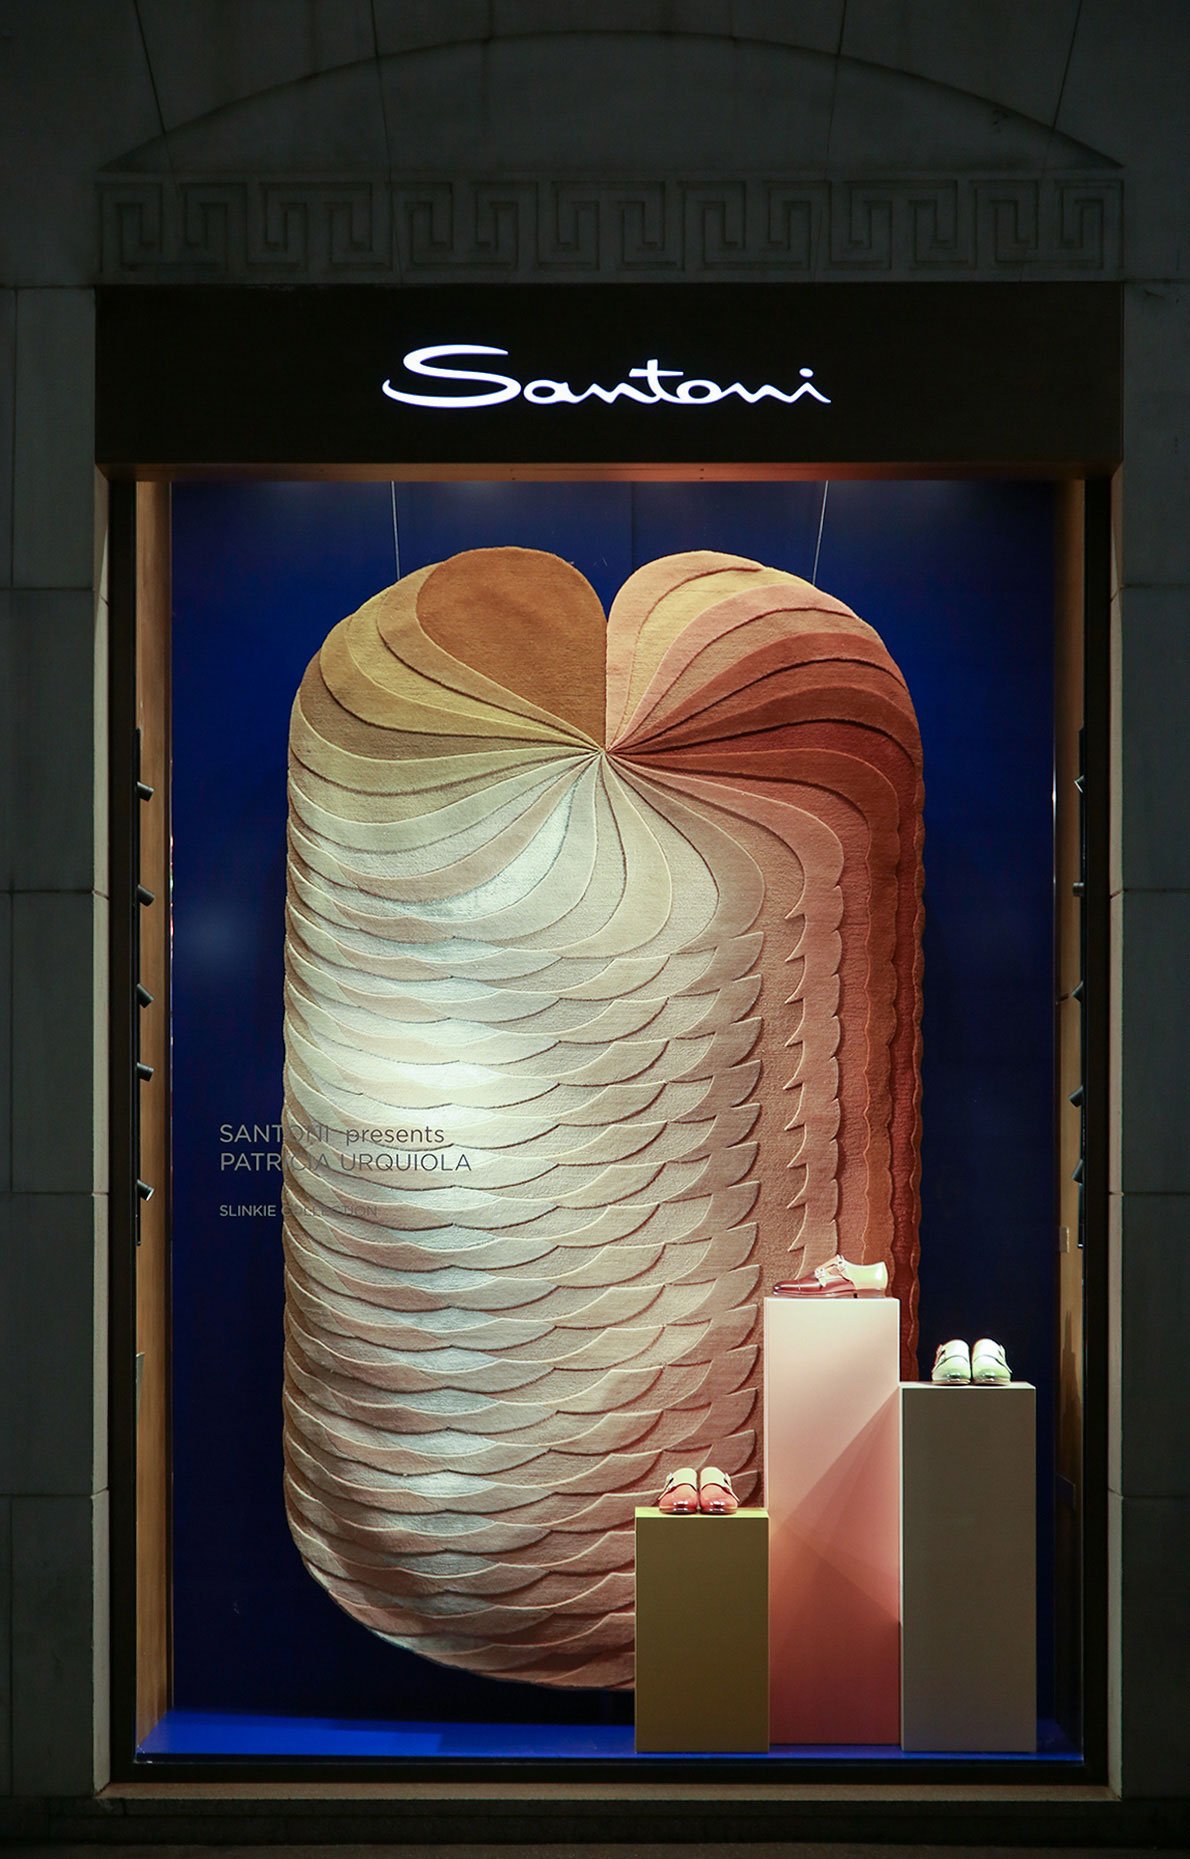 The new collection of Slinkie rugs by Patricia Urquiola for cc-tapis was featured in the window of Santoni boutique among limited-edition double monk shoes which were produced in the same color palette with the rug.